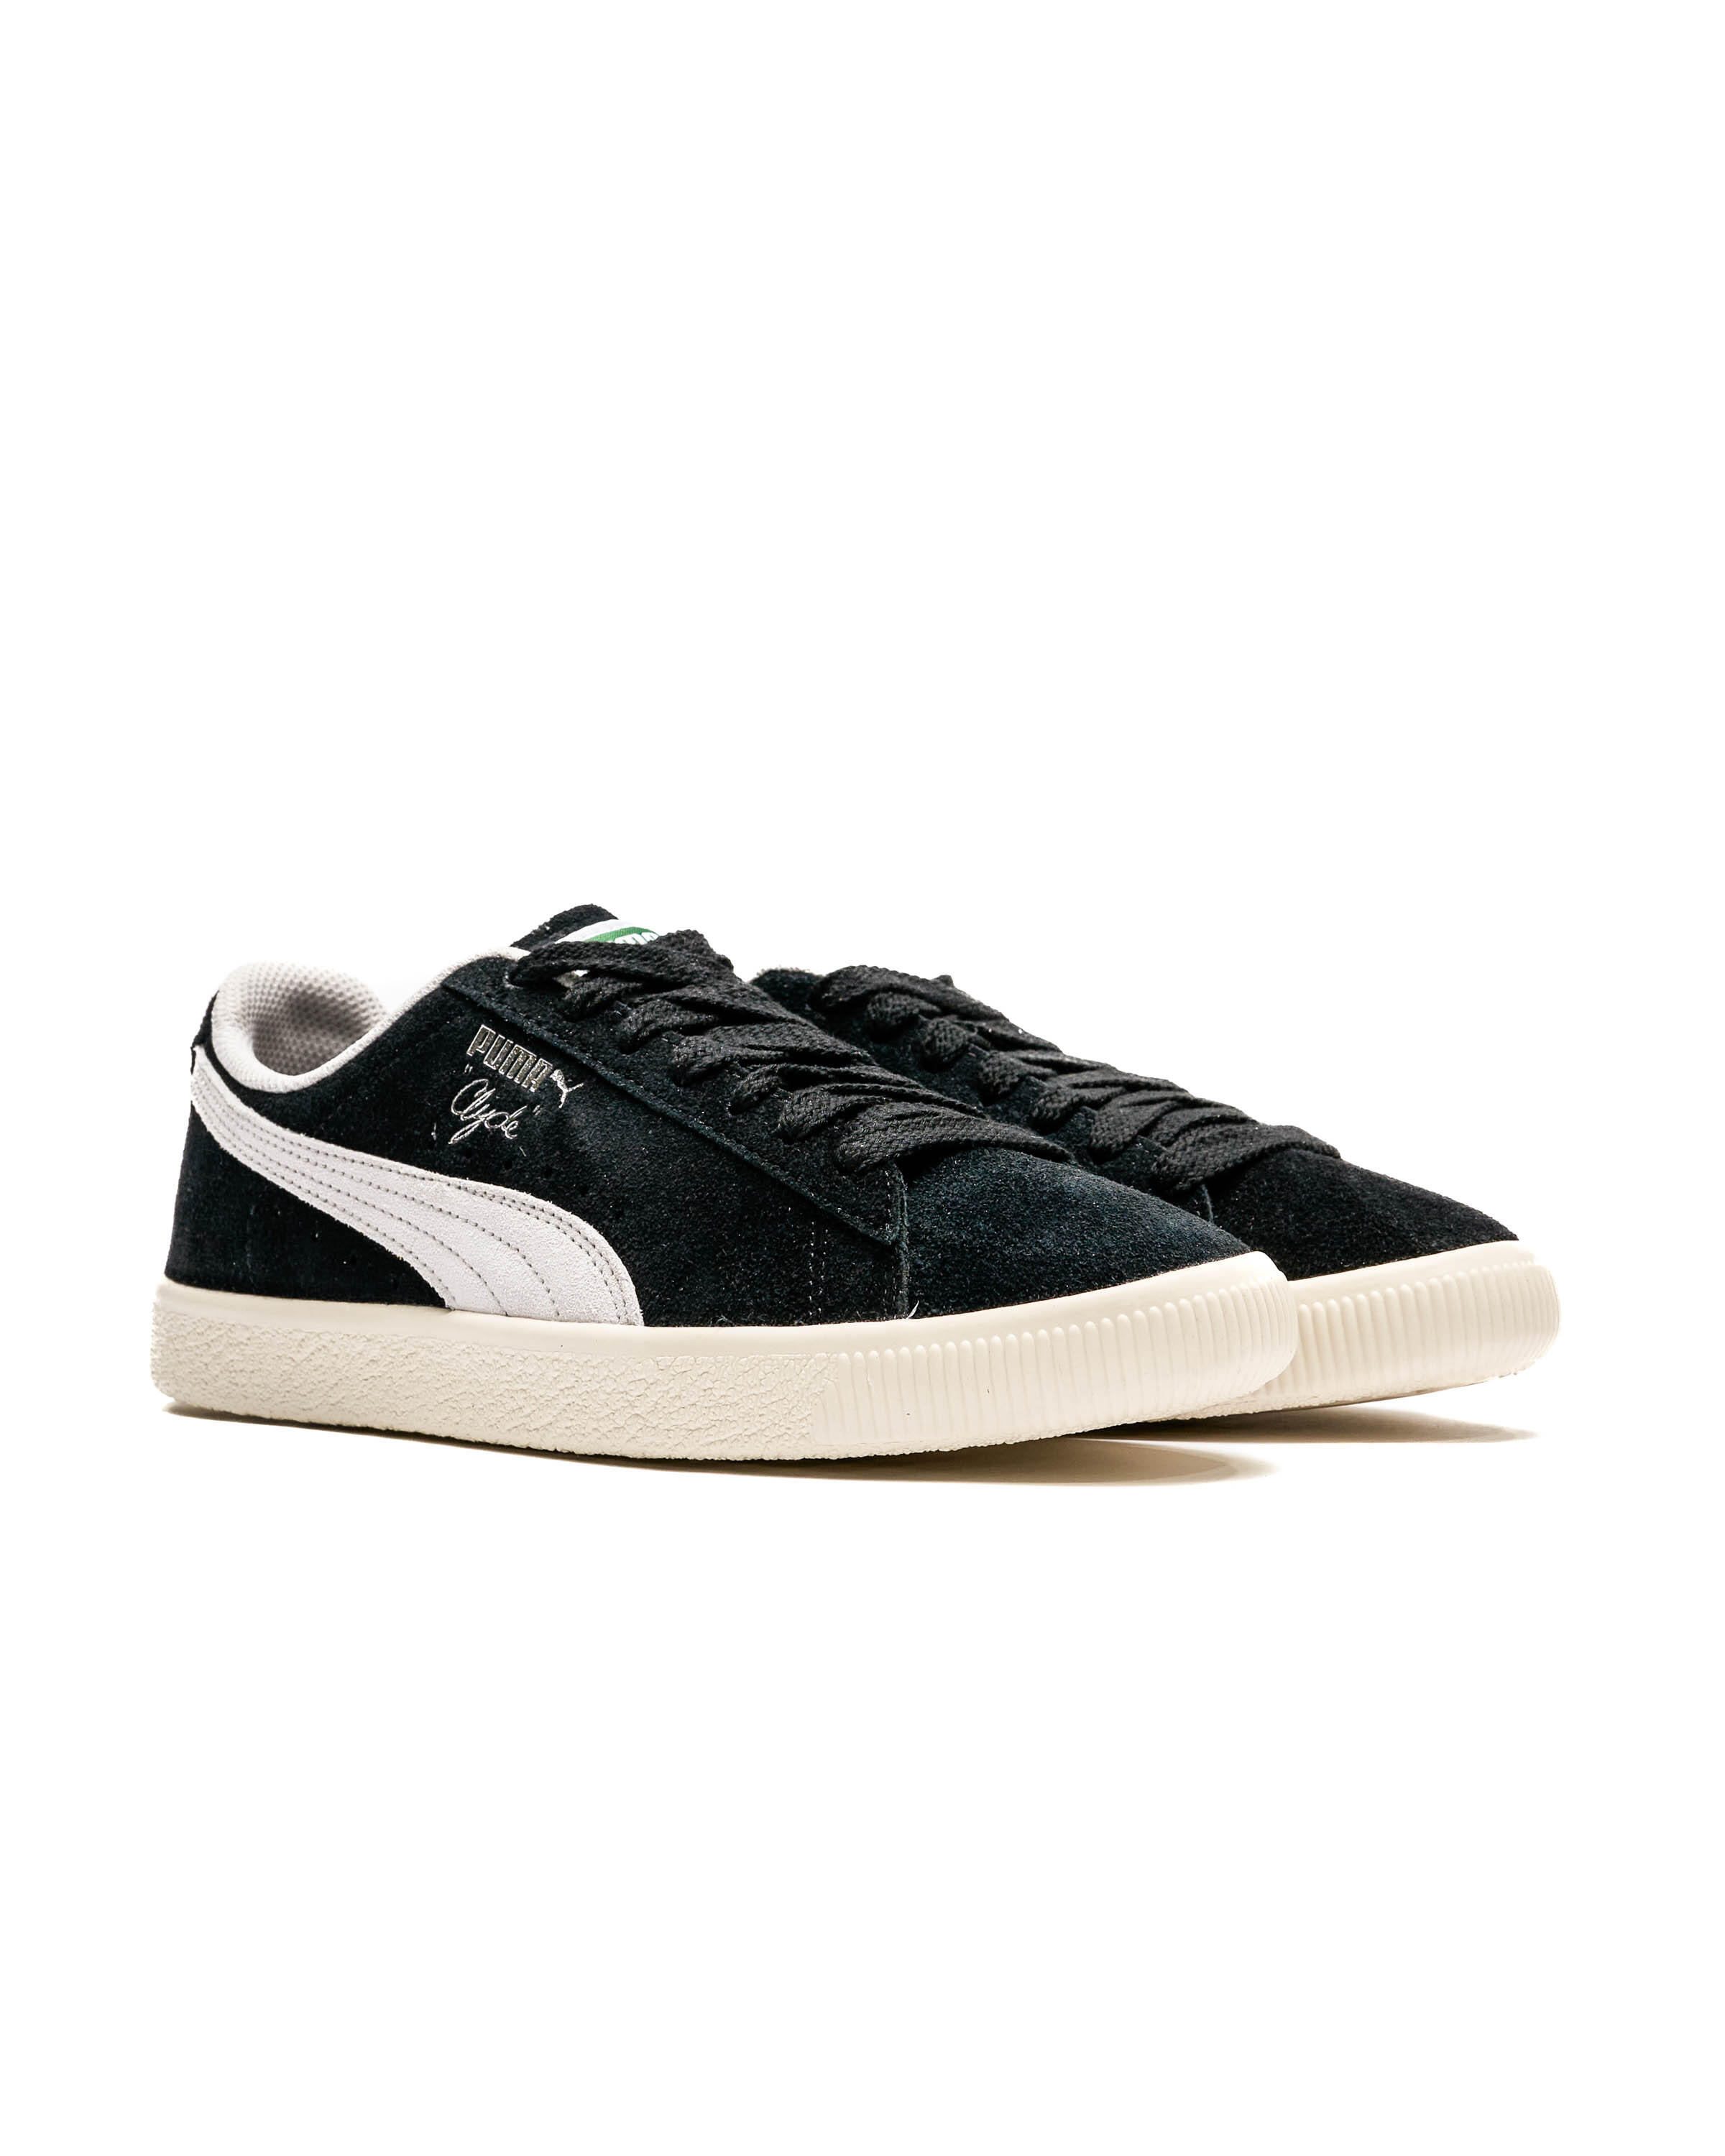 Puma Clyde Hairy Suede